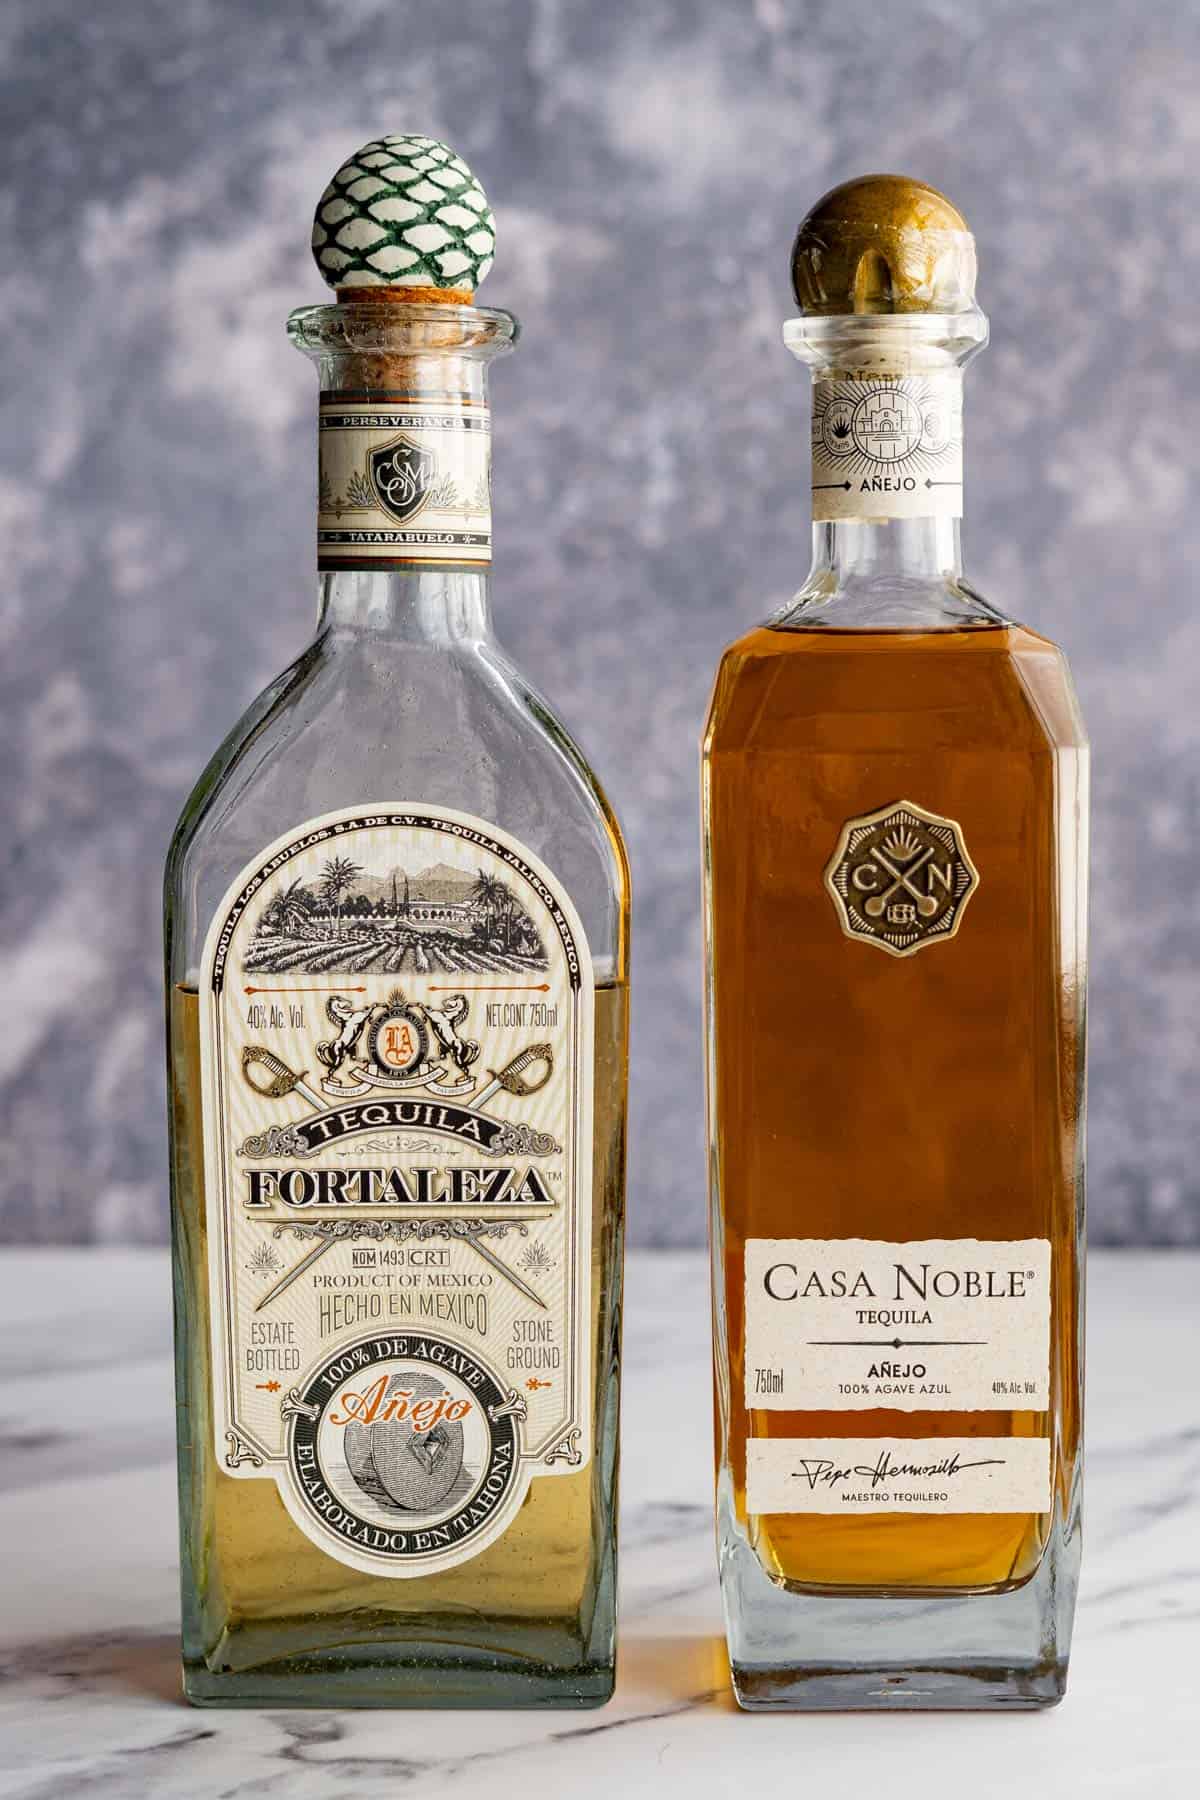 Two bottles of añejo tequila, including Fortuleza and Casa Noble, sit on a white marble countertop.